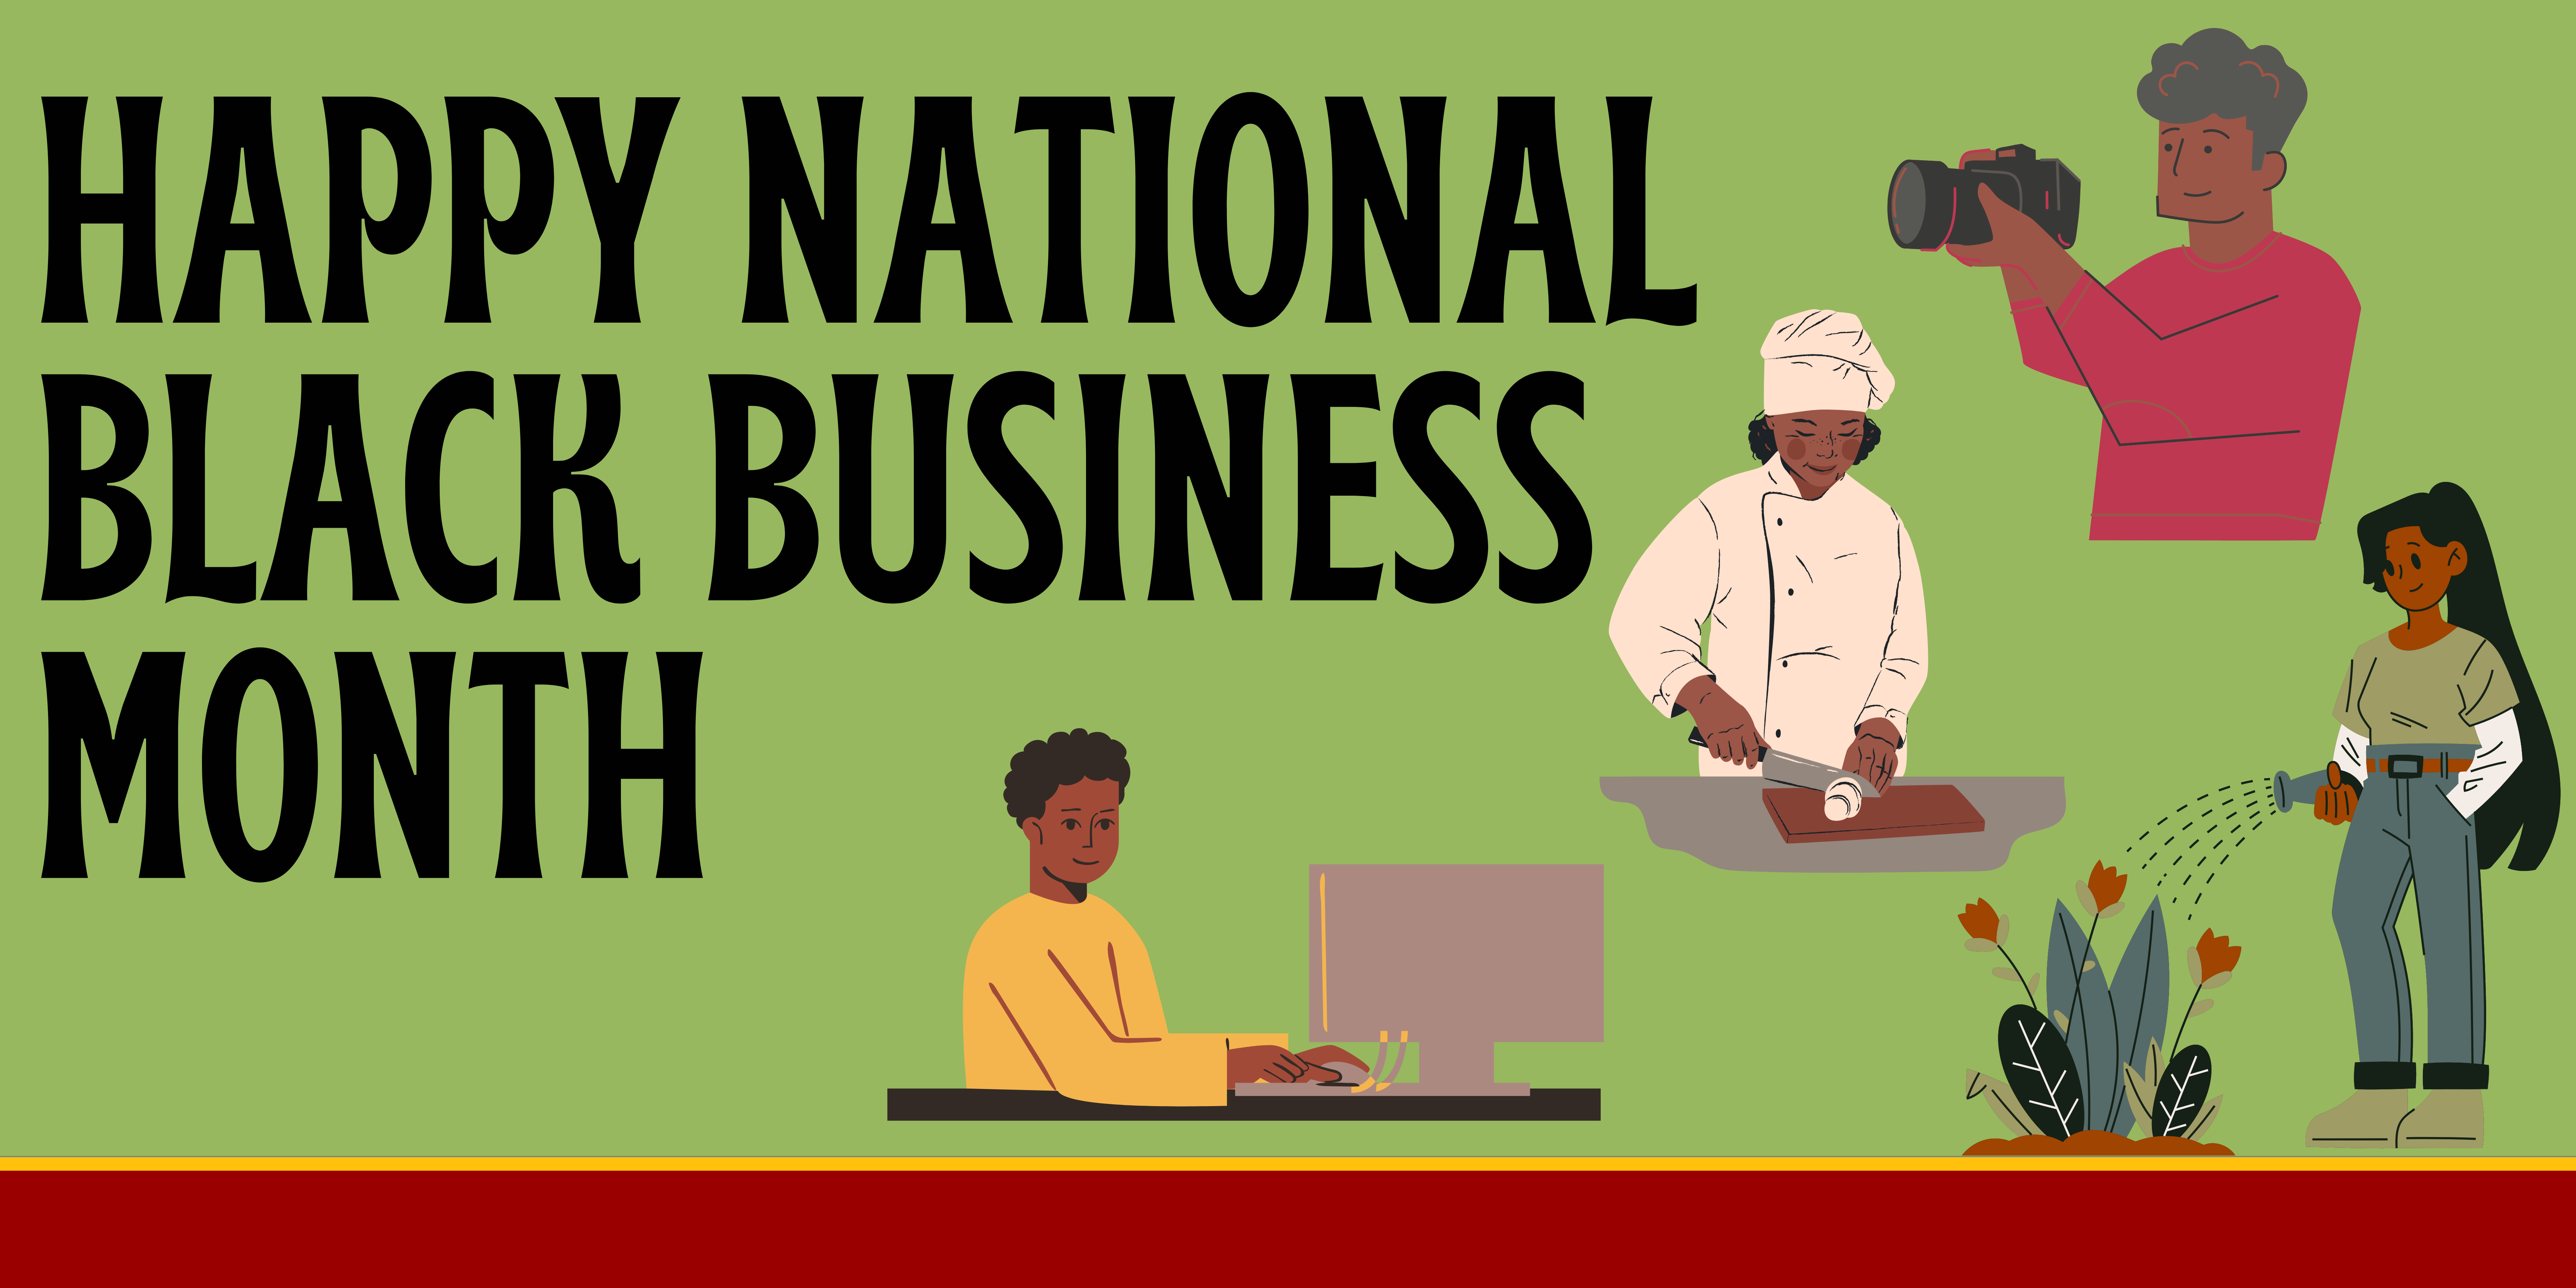 A banner featuring cartoon characters of black business owners engaged in various activities.